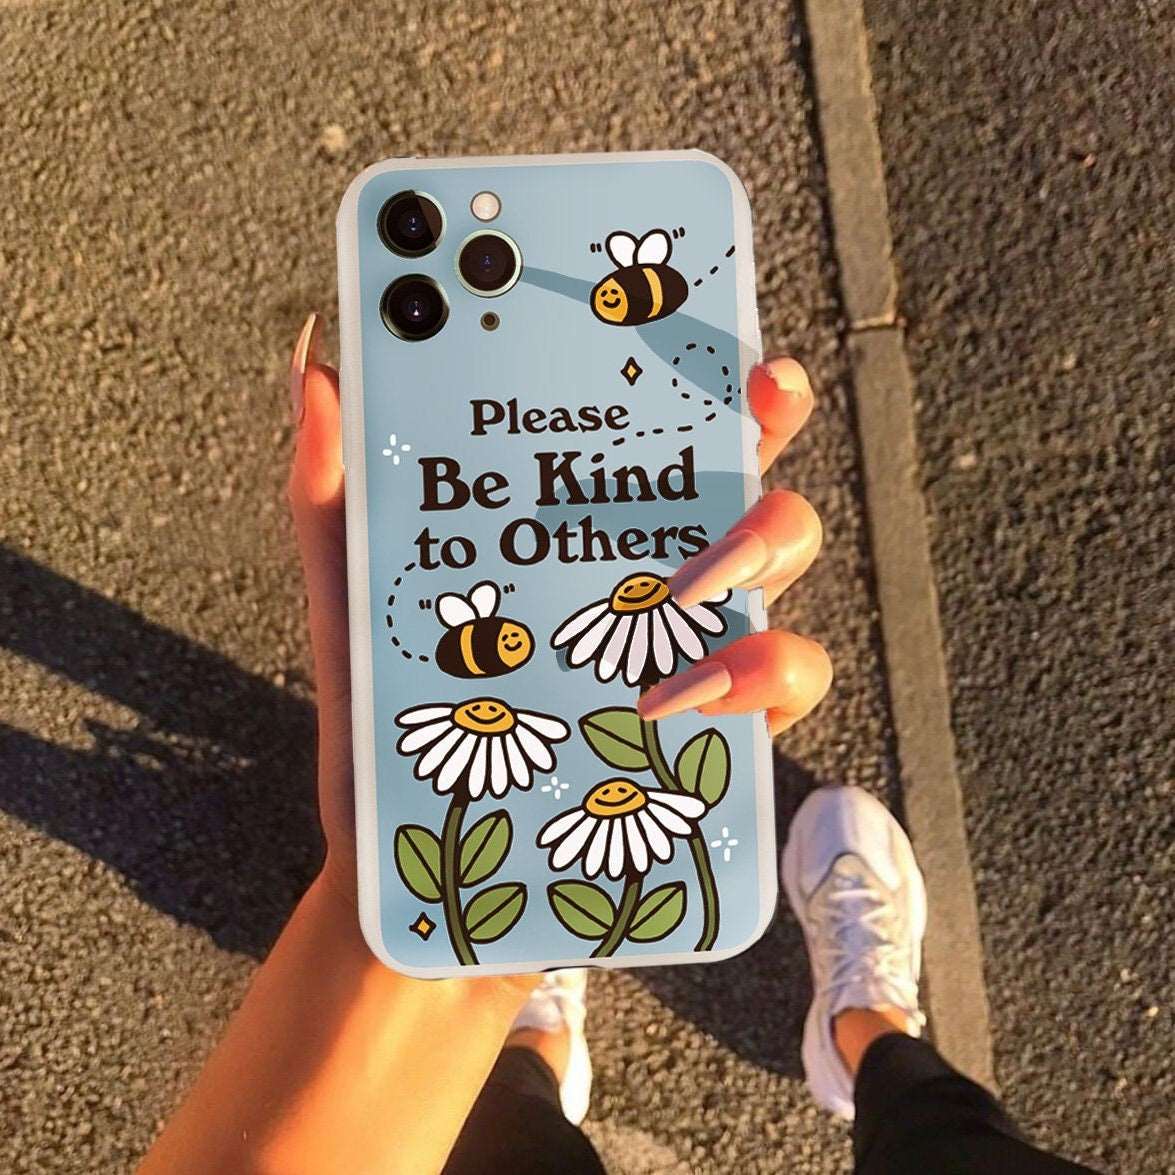 'Be Kind To Others' Retro Phone Case - Tote Bags & Phone Cases - Kinder Planet Company